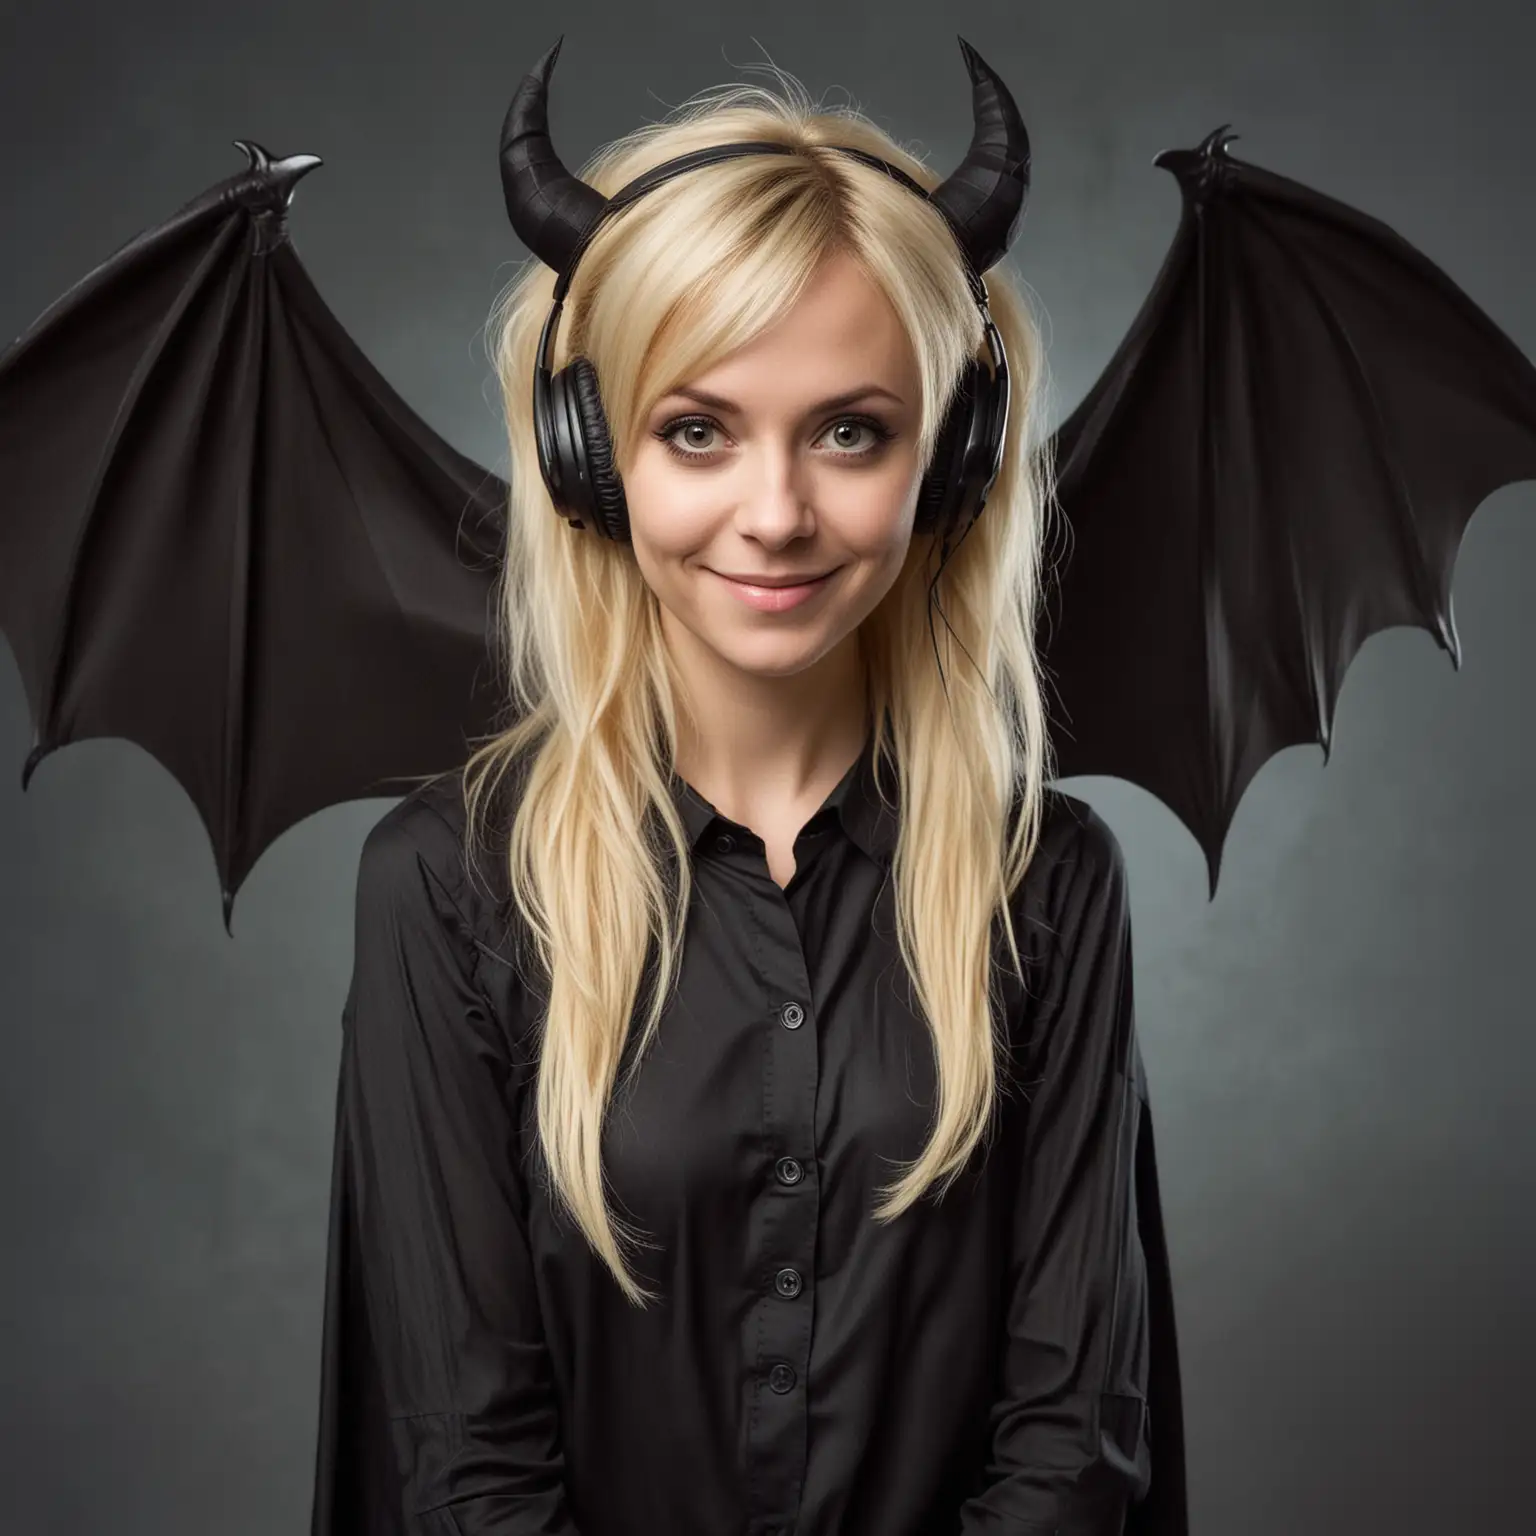 Blonde Icelandic Nerdy Woman with Bat Wings and Horns Listening to Music